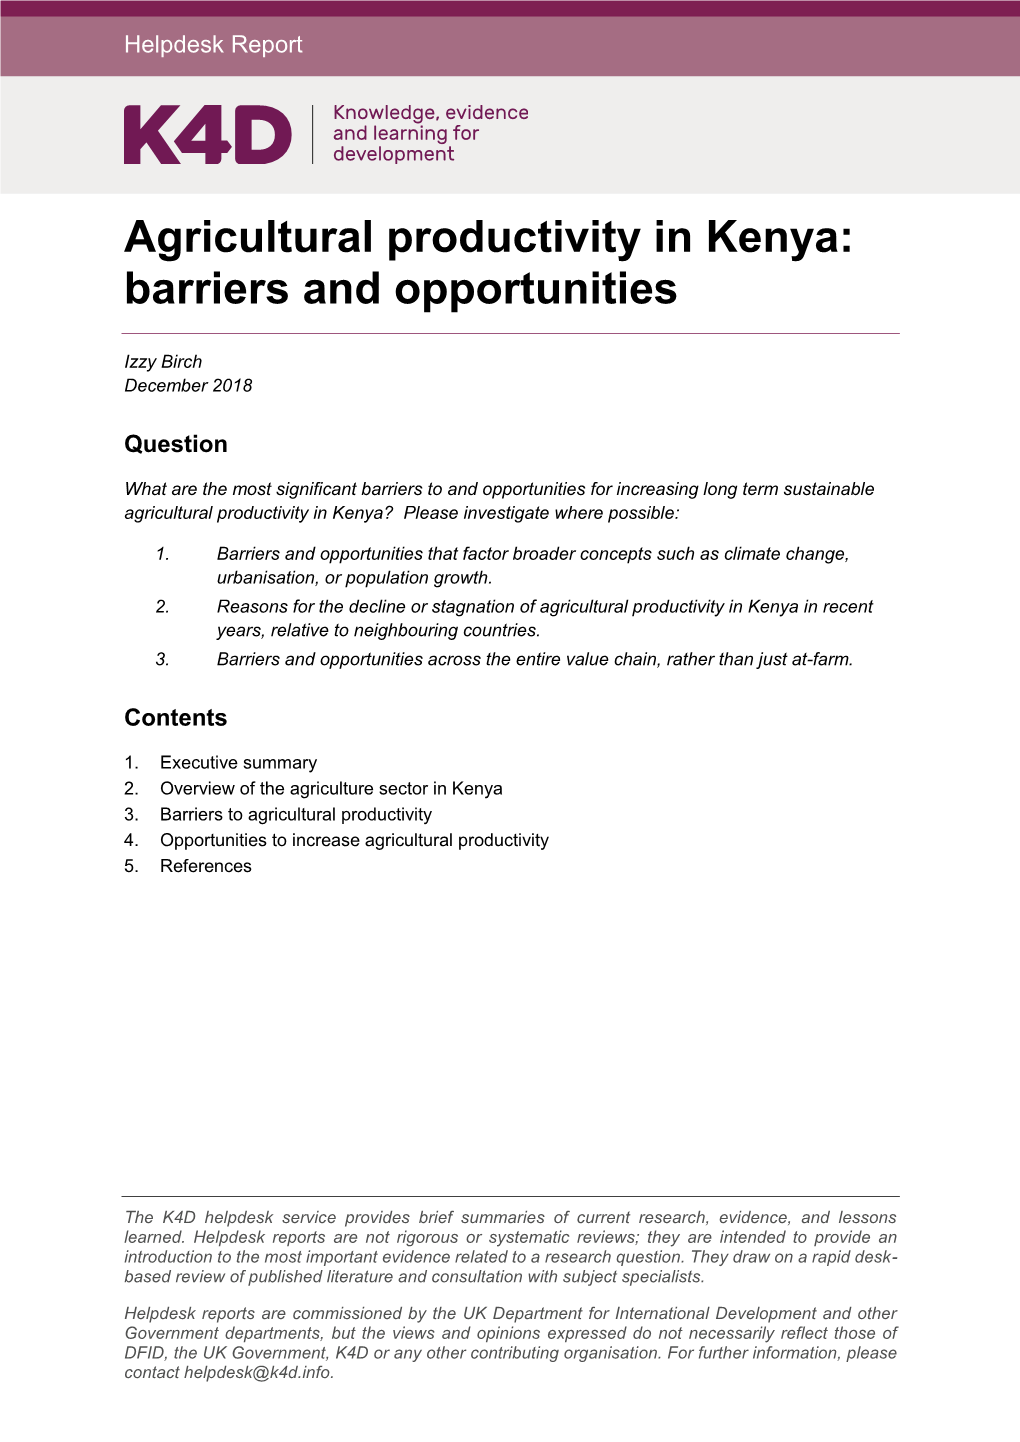 Agricultural Productivity in Kenya: Barriers and Opportunities